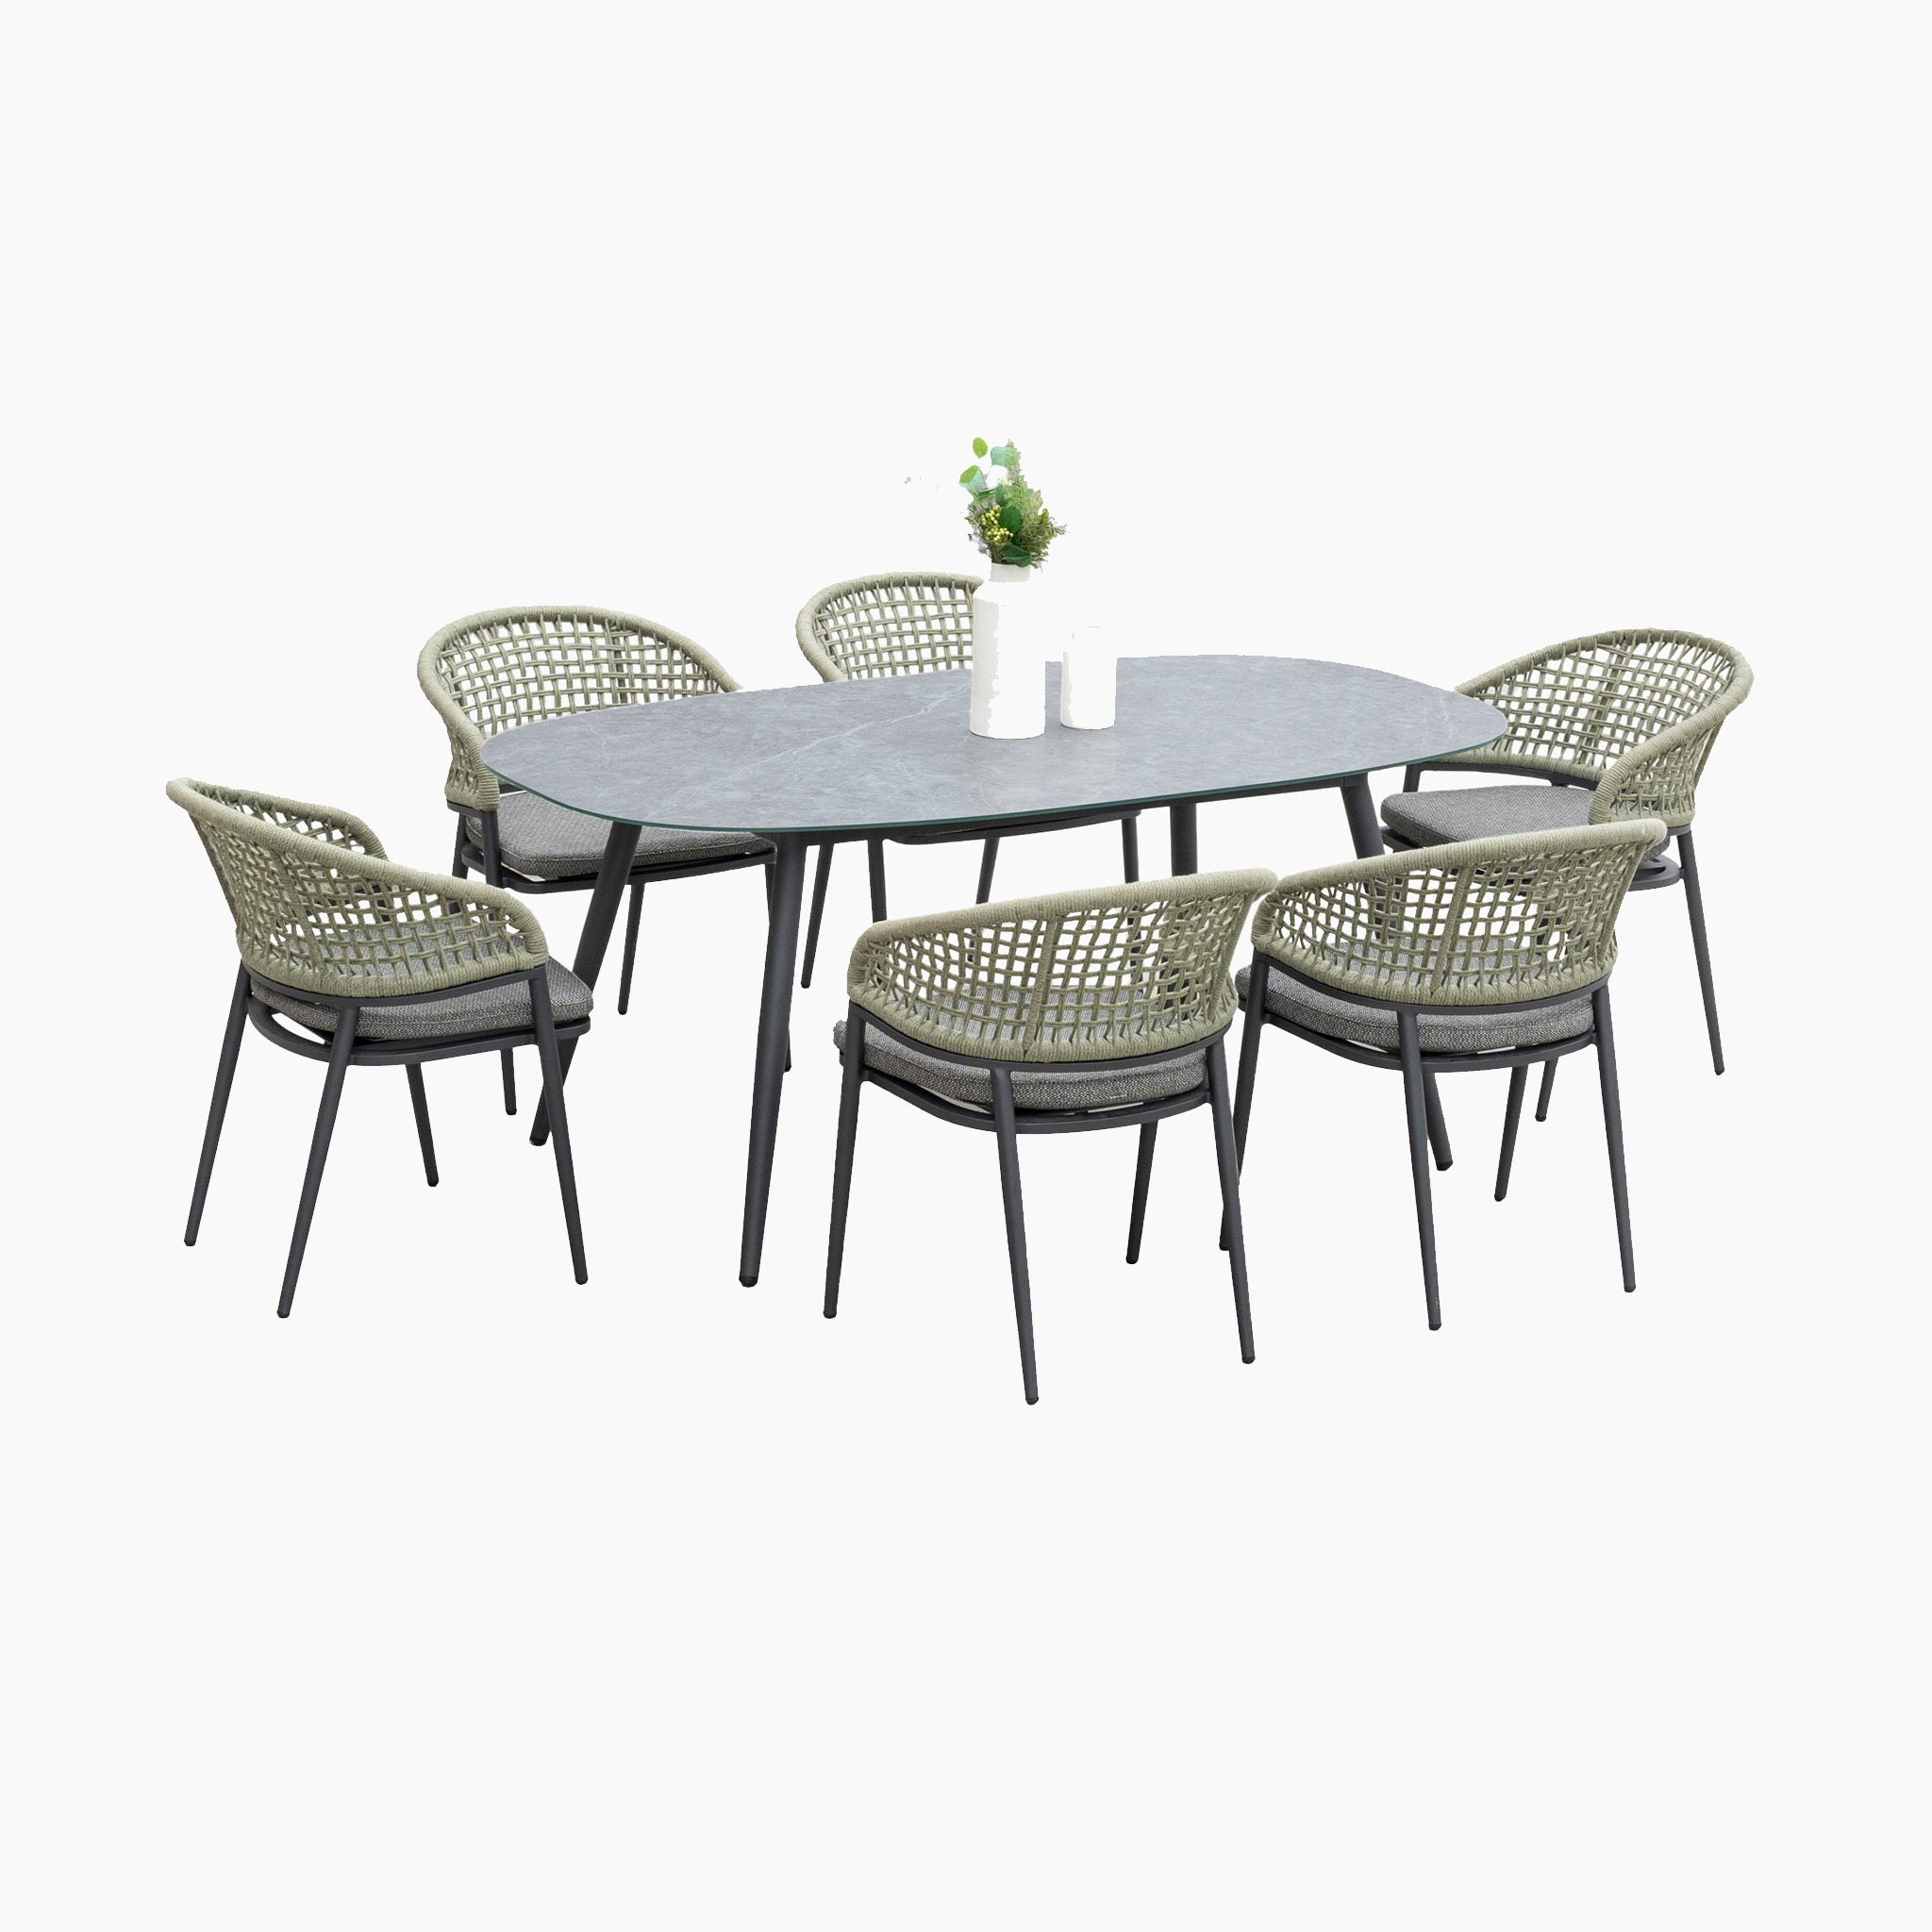 Kalama 6 Seat Rope Oval Dining Set with Ceramic Table in Olive Green